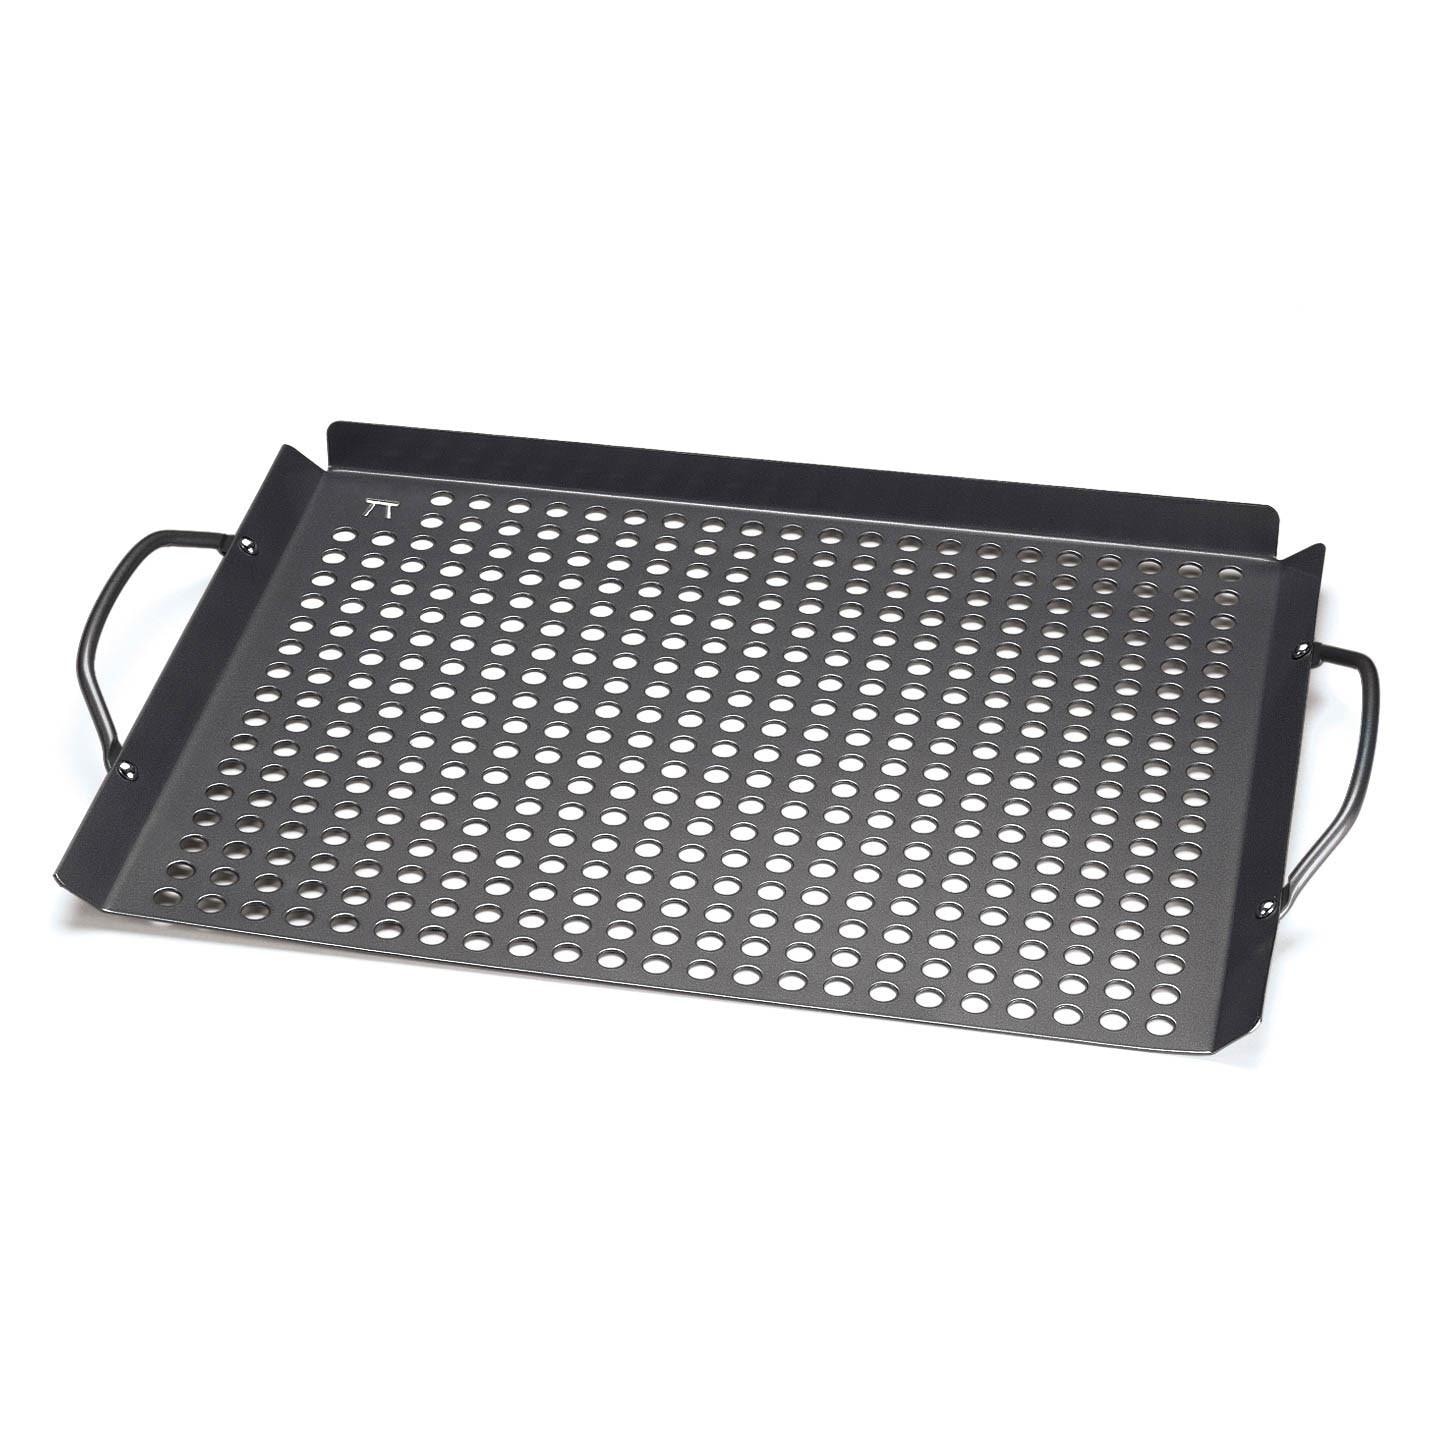 Outset 17 X 11 Black Non-Stick Large Grill Grid - image 1 of 7